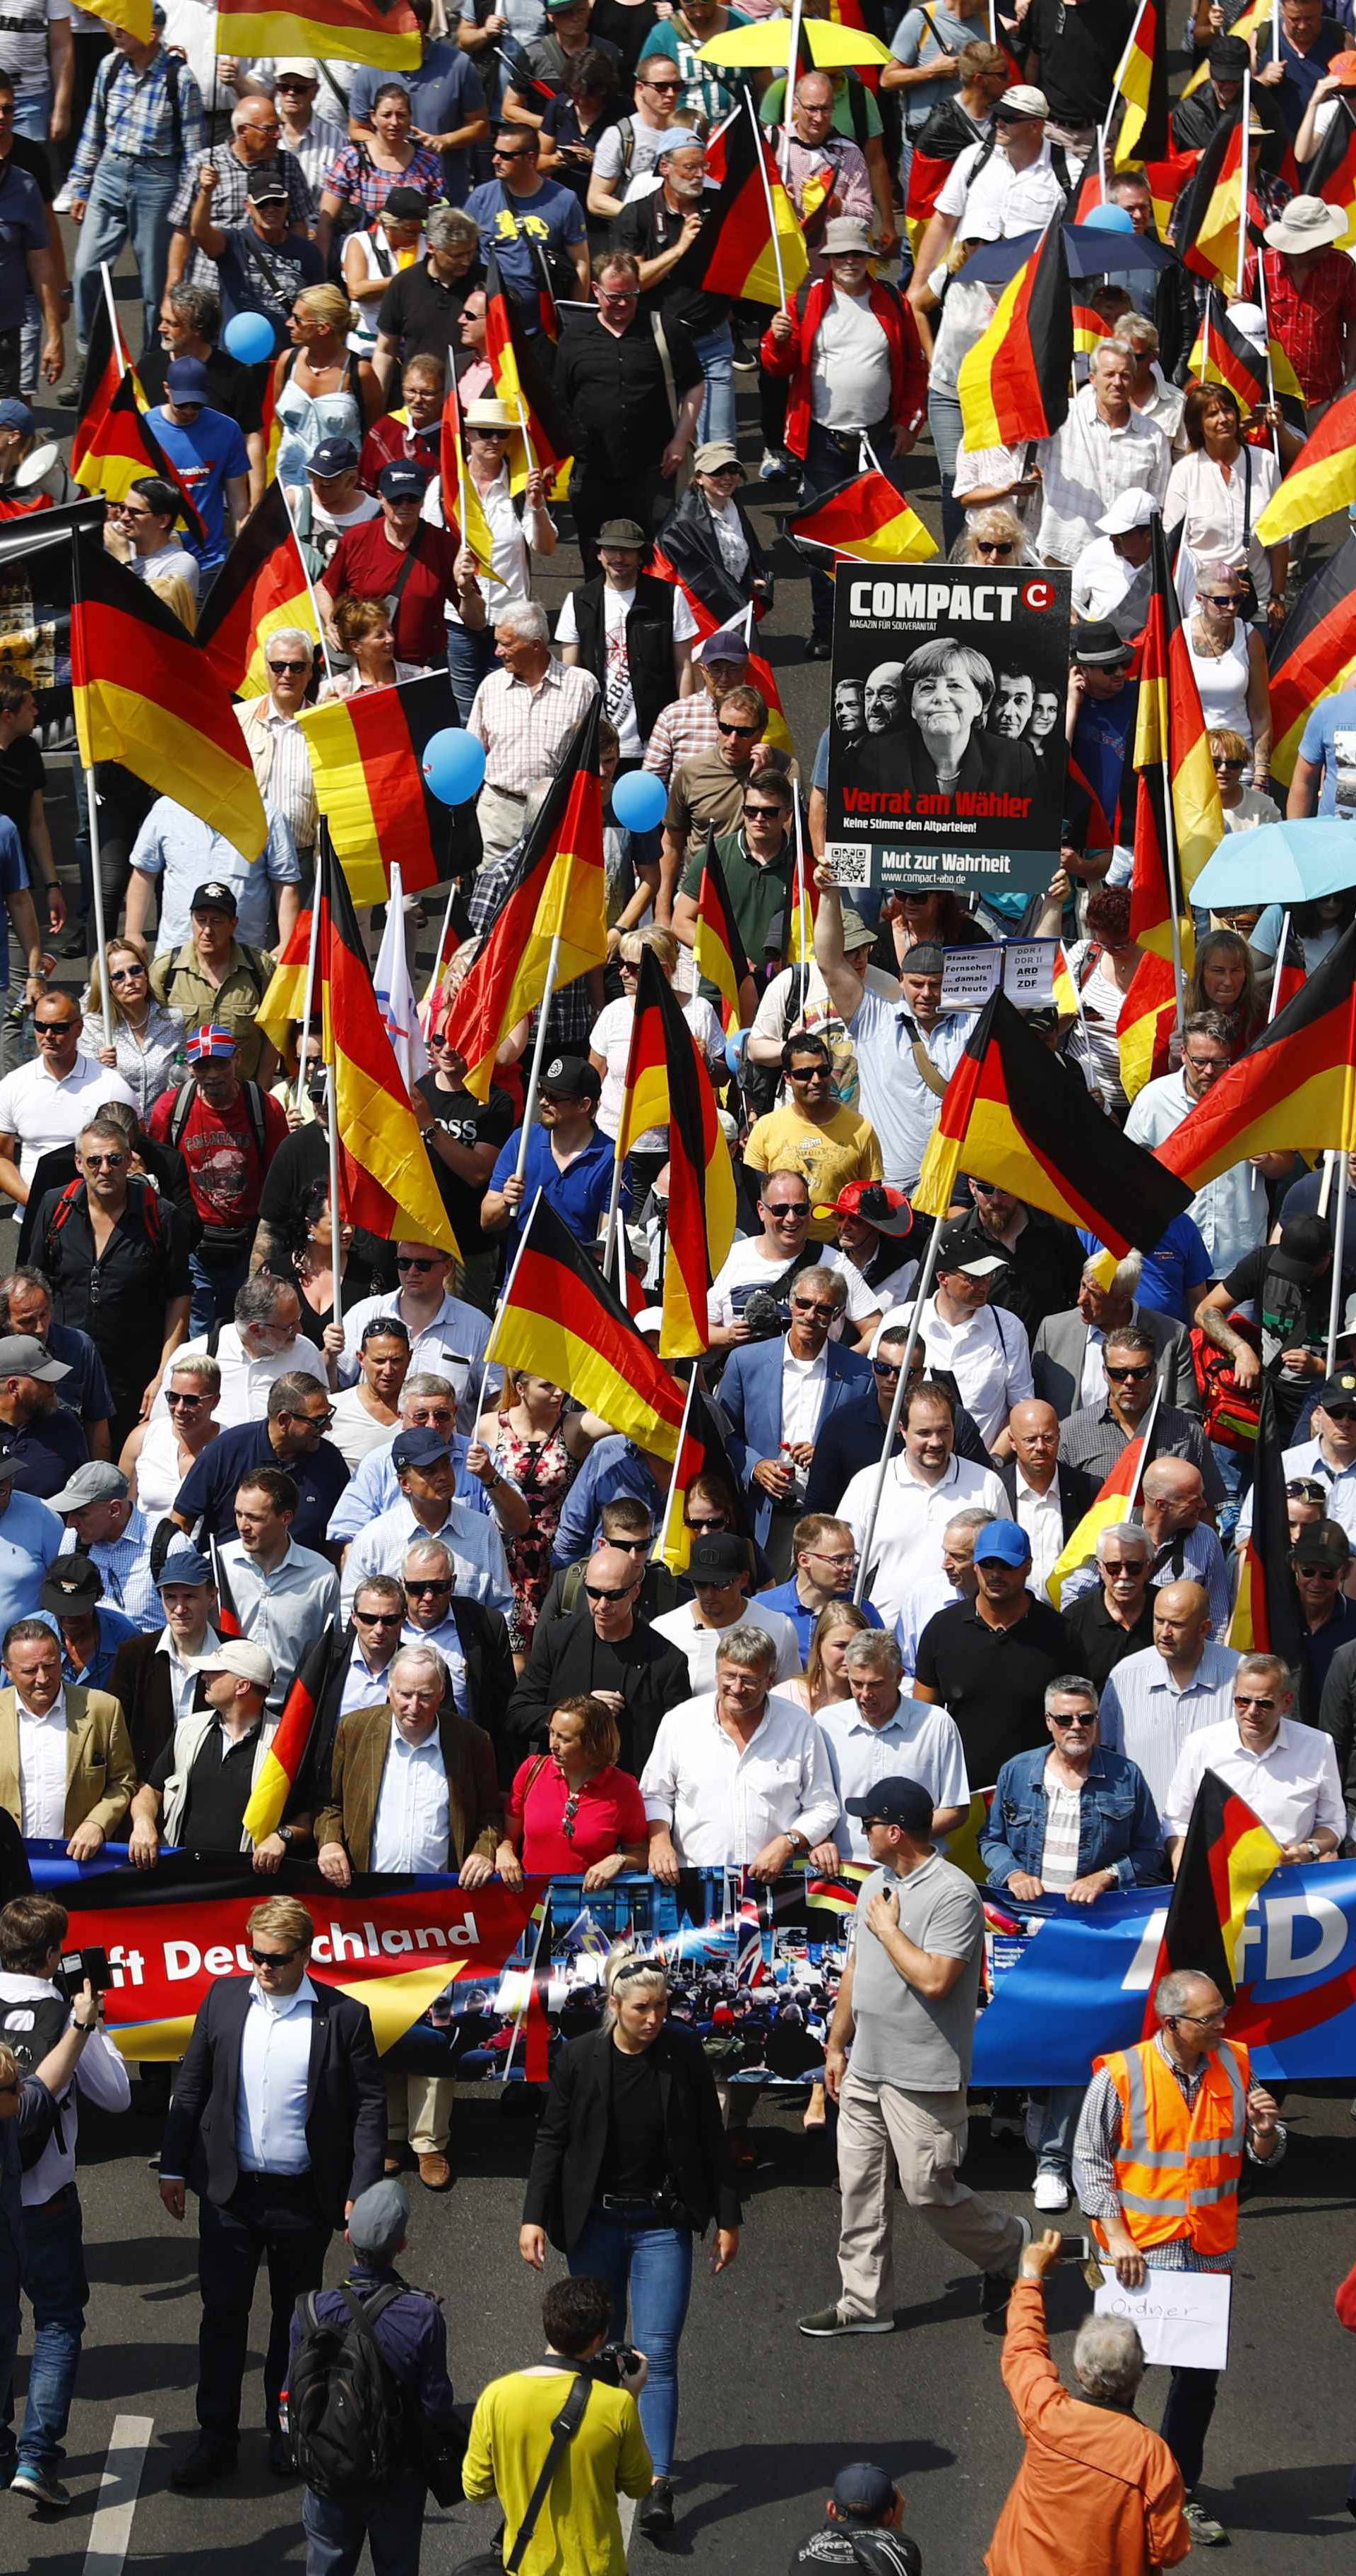 Supporters of the Anti-immigration party Alternative for Germany (AfD) hold a protest in Berlin